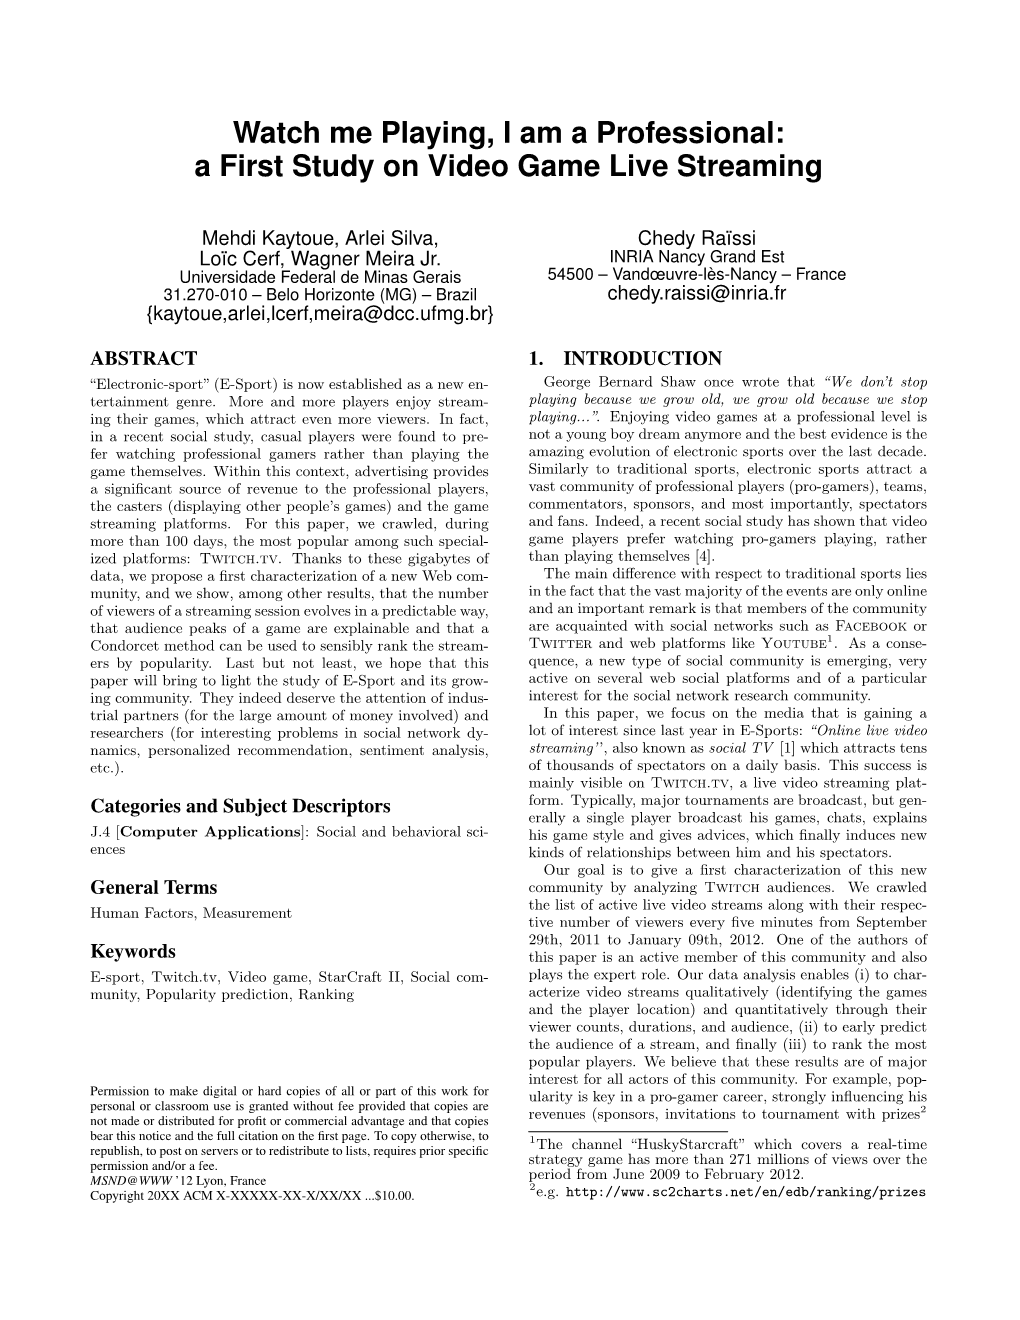 A First Study on Video Game Live Streaming